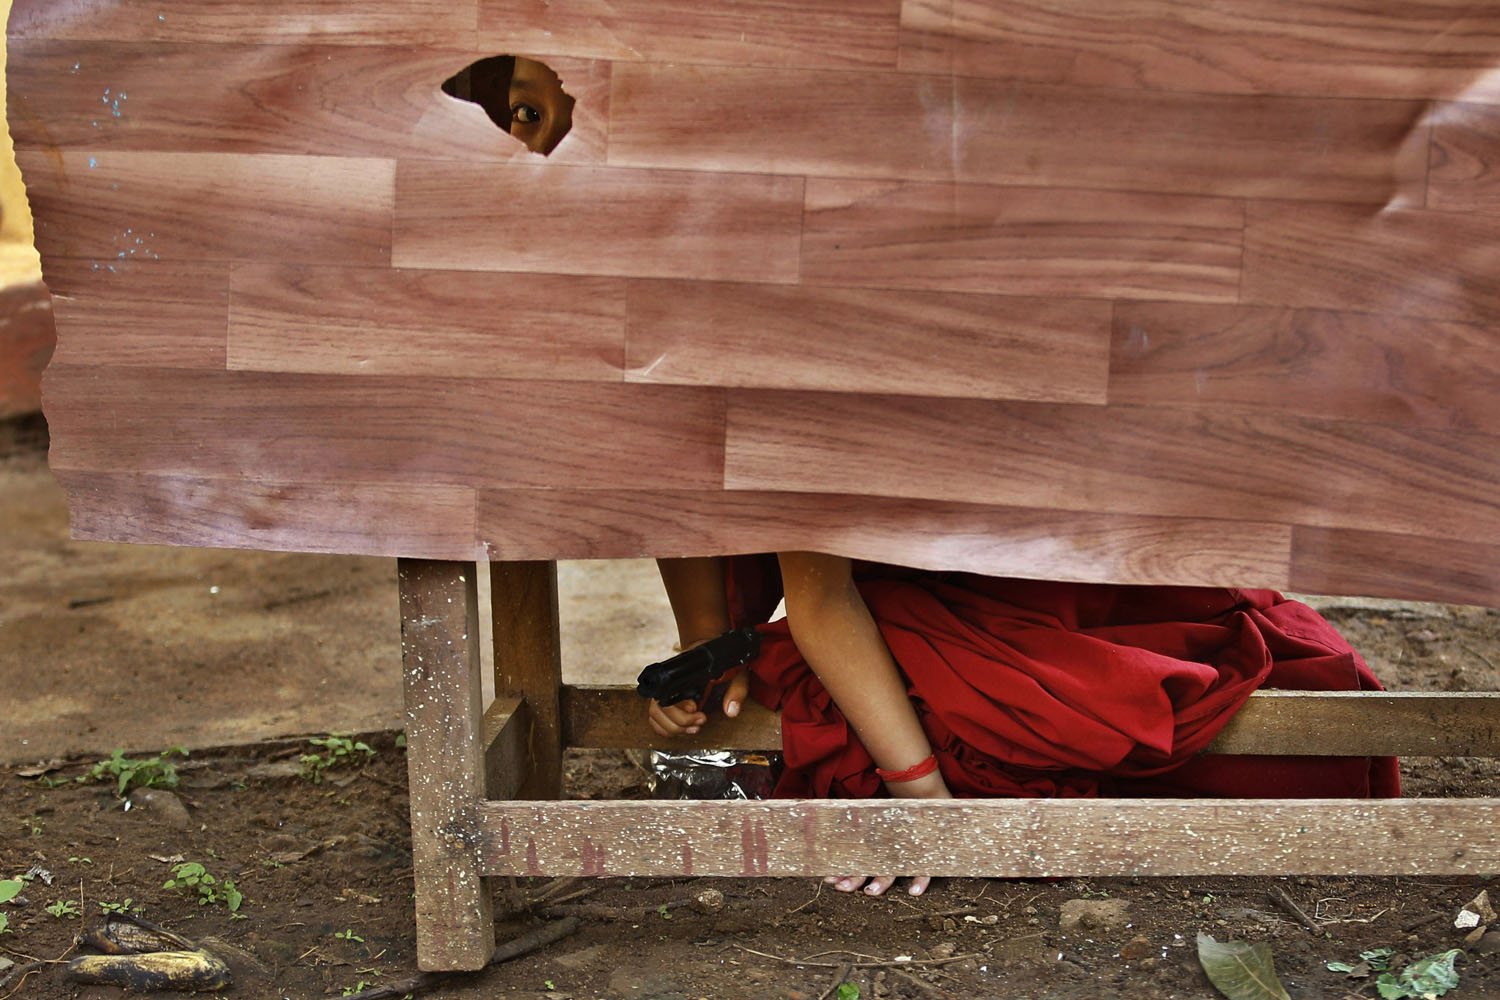 July 15, 2013. A novice Tibetan Buddhist monk peeps through a hole as he hides behind a desk holding a toy gun during a break from their spiritual leader the Dalai Lama's religious sermon outside the Gyudmed Tantric Monastery in Gurupura 132 miles southwest of Bangalore, India.